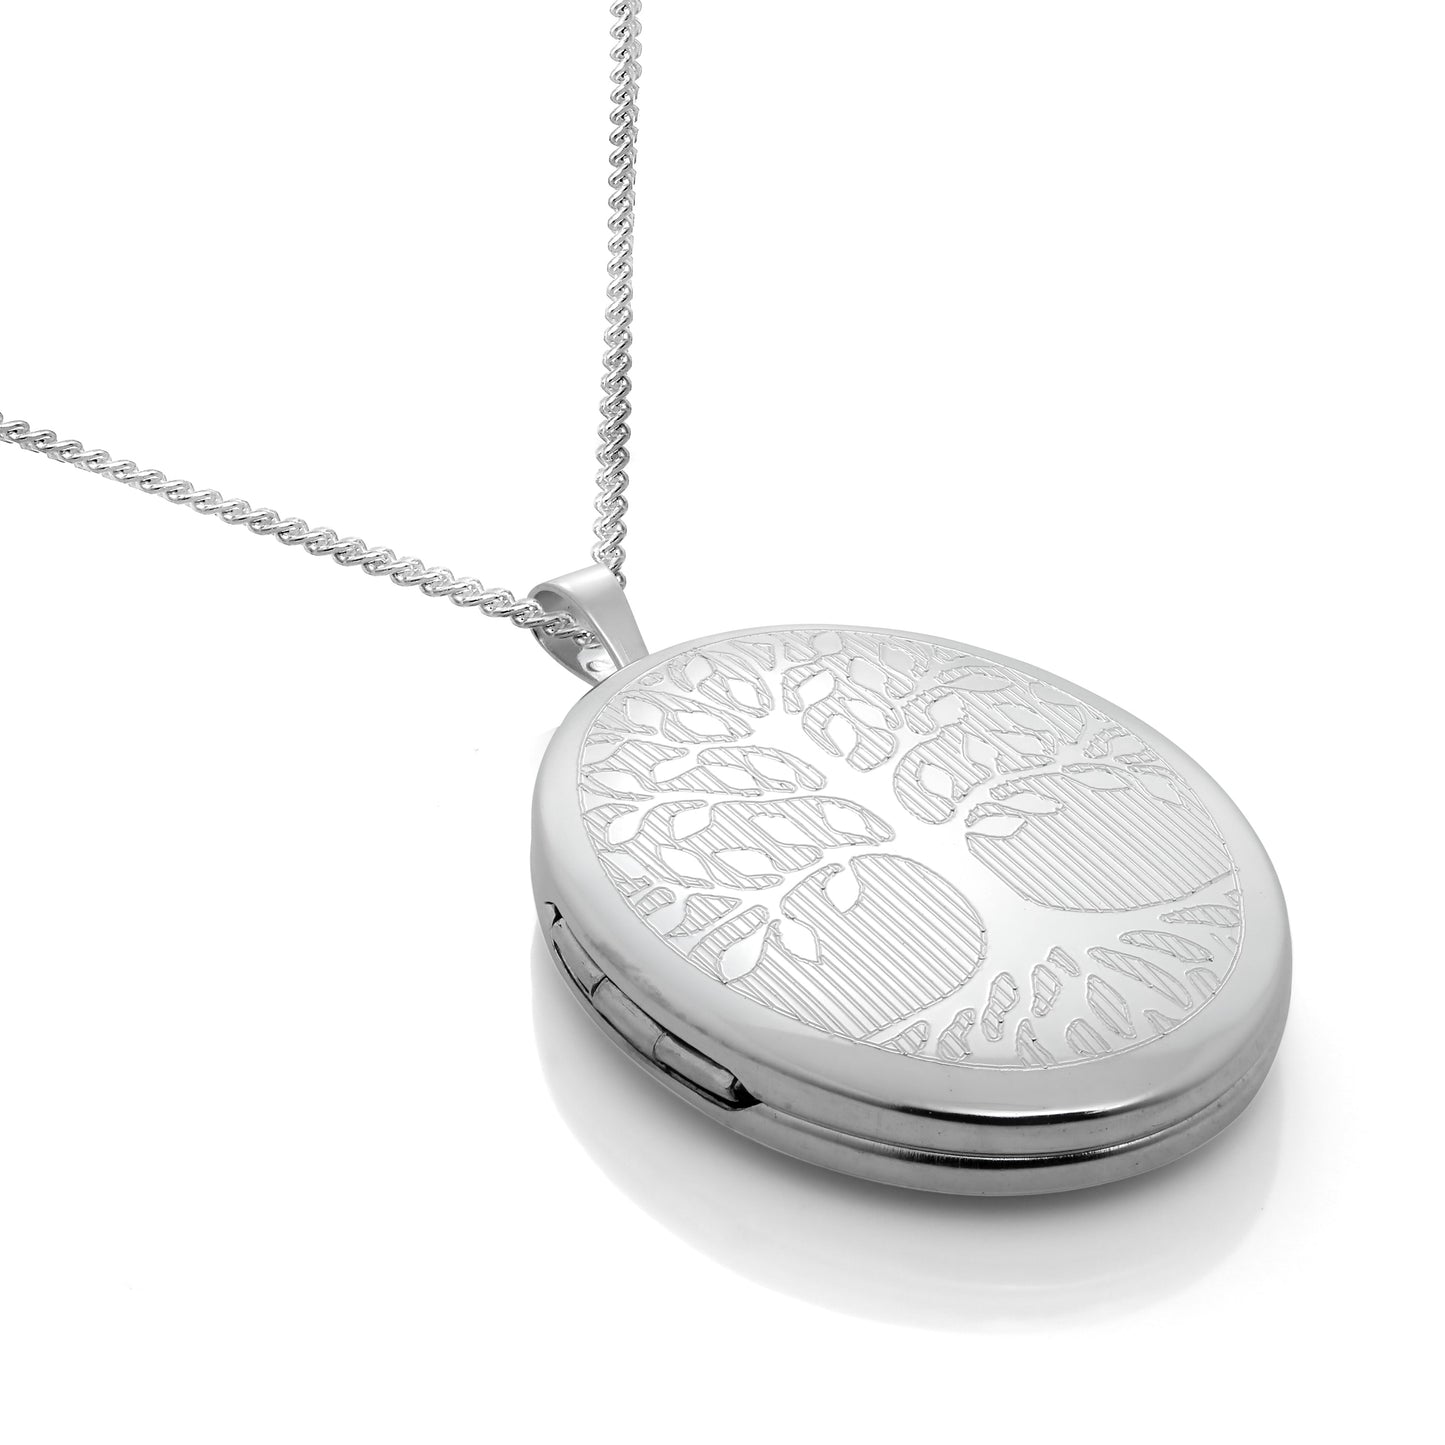 Sterling Silver Engraved Tree of Life Oval Locket on Chain